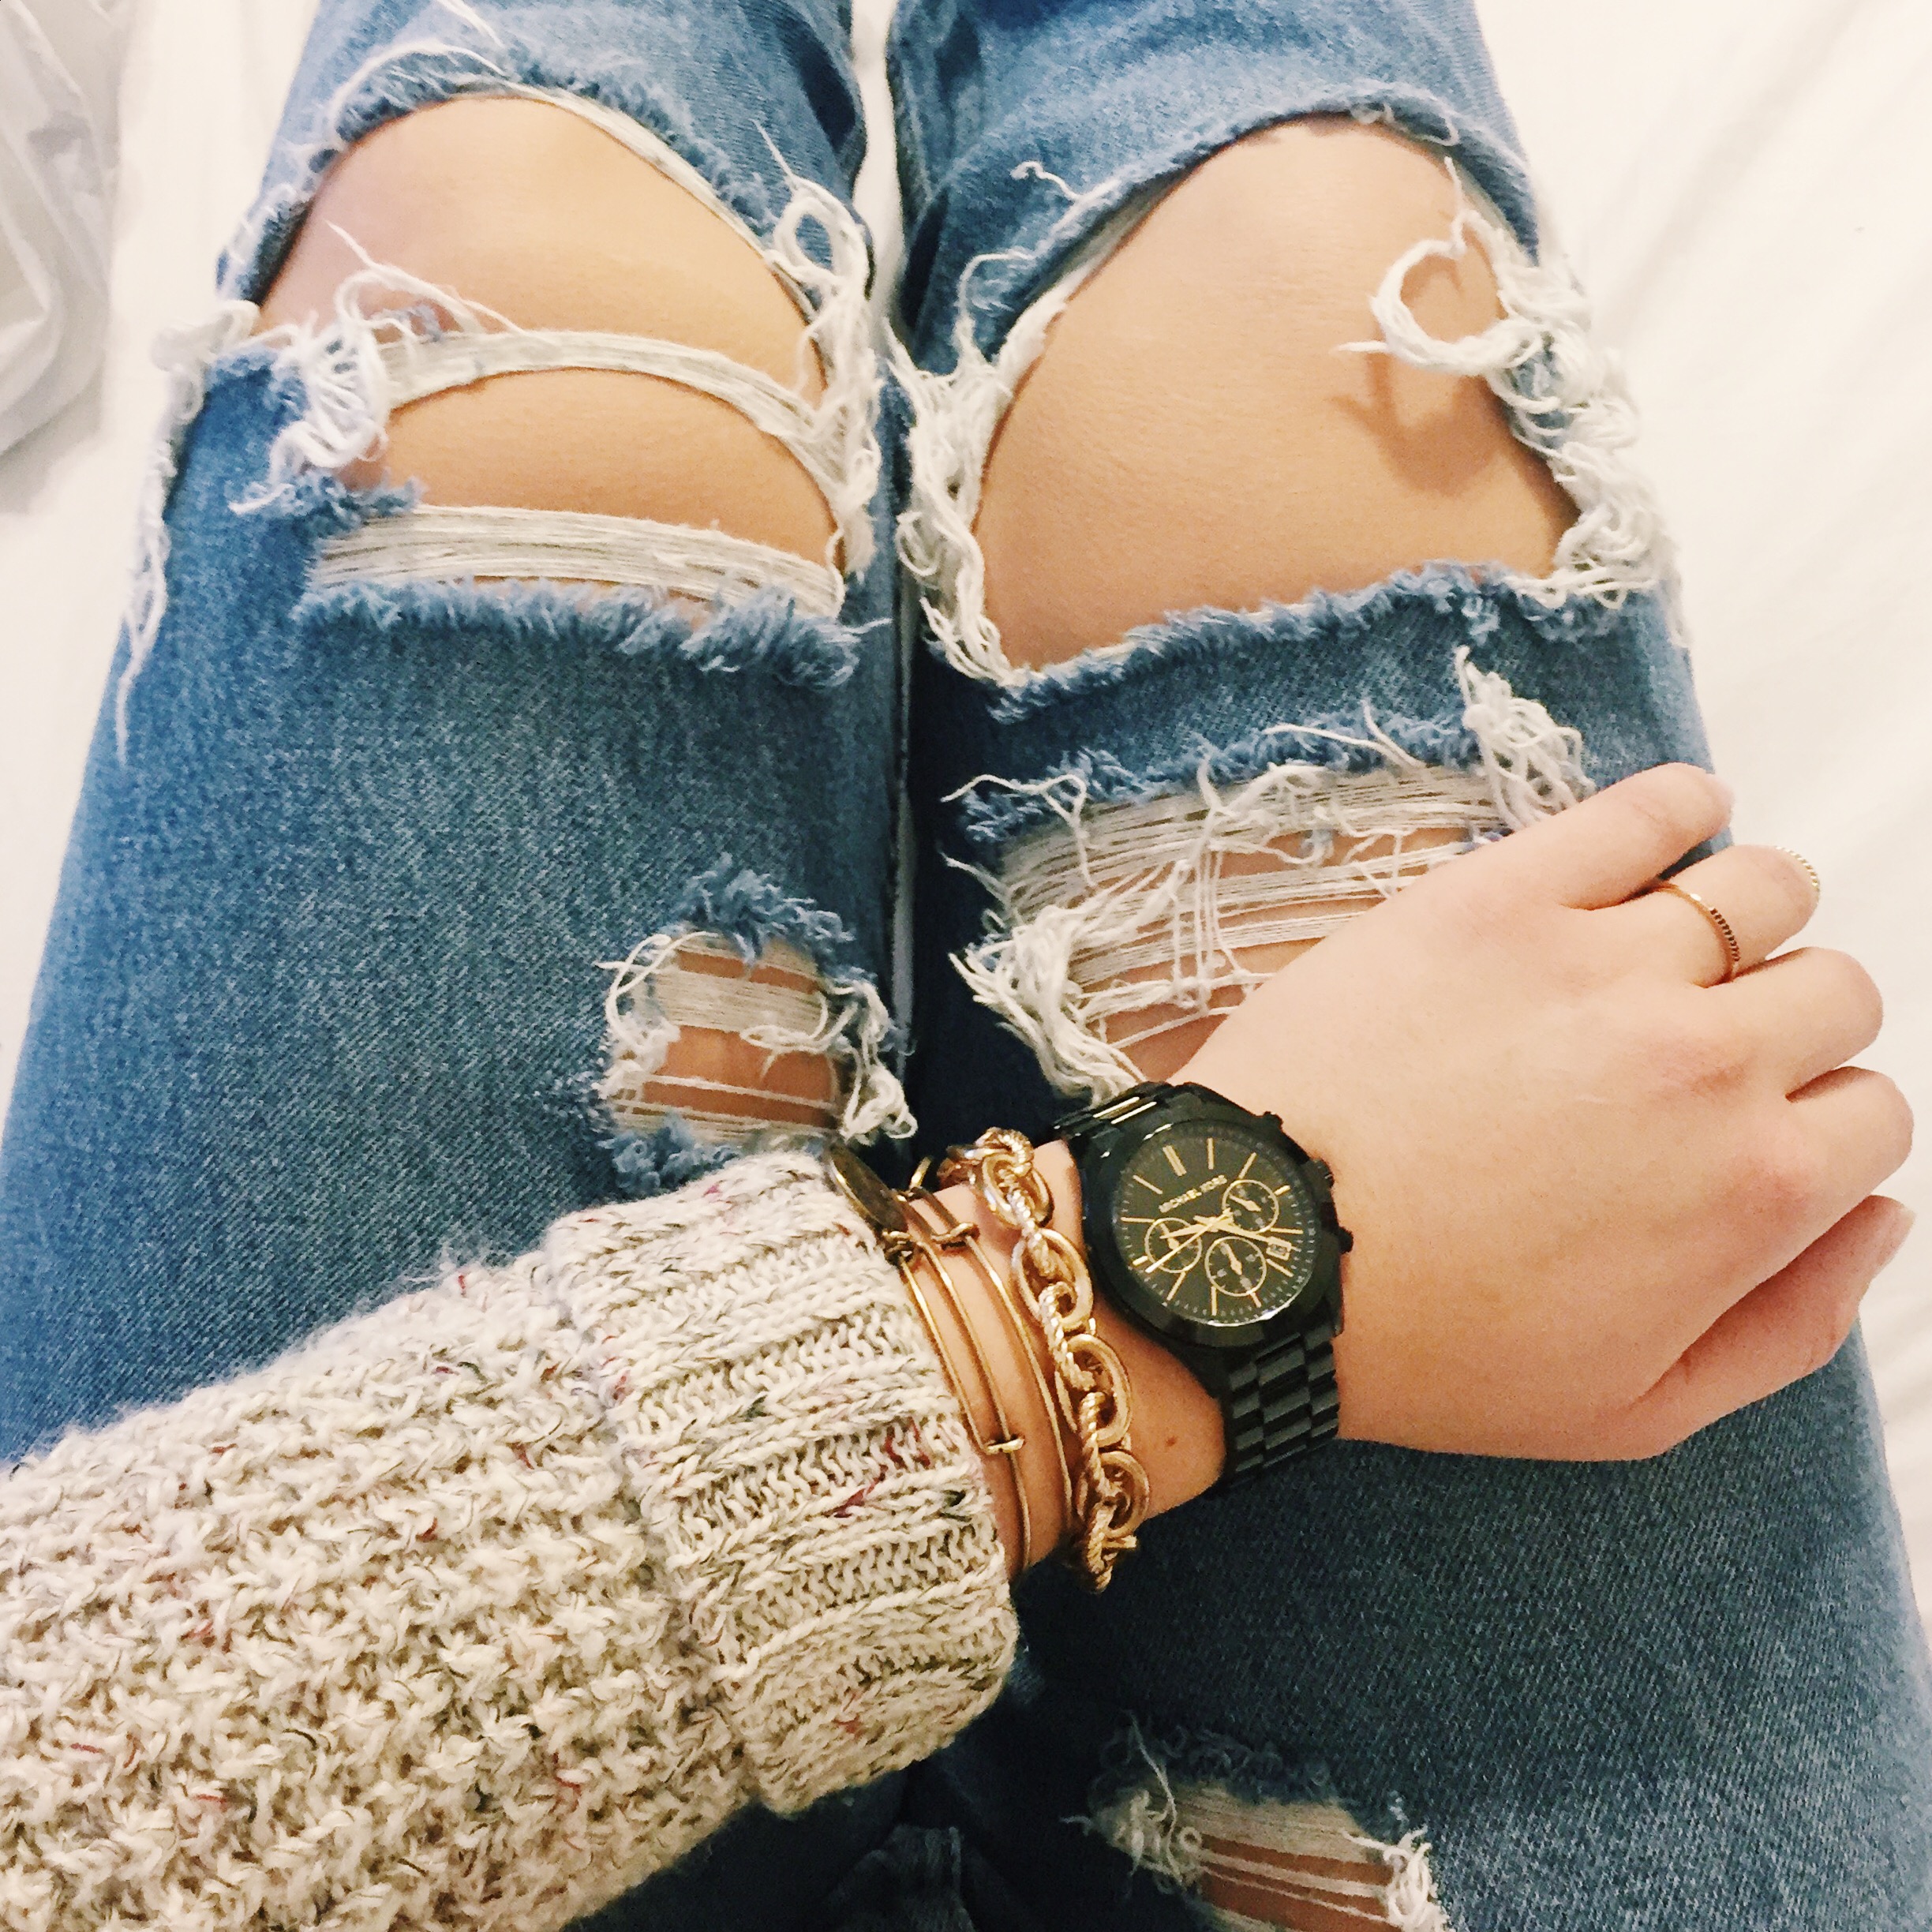 How to DIY Ripped Jeans